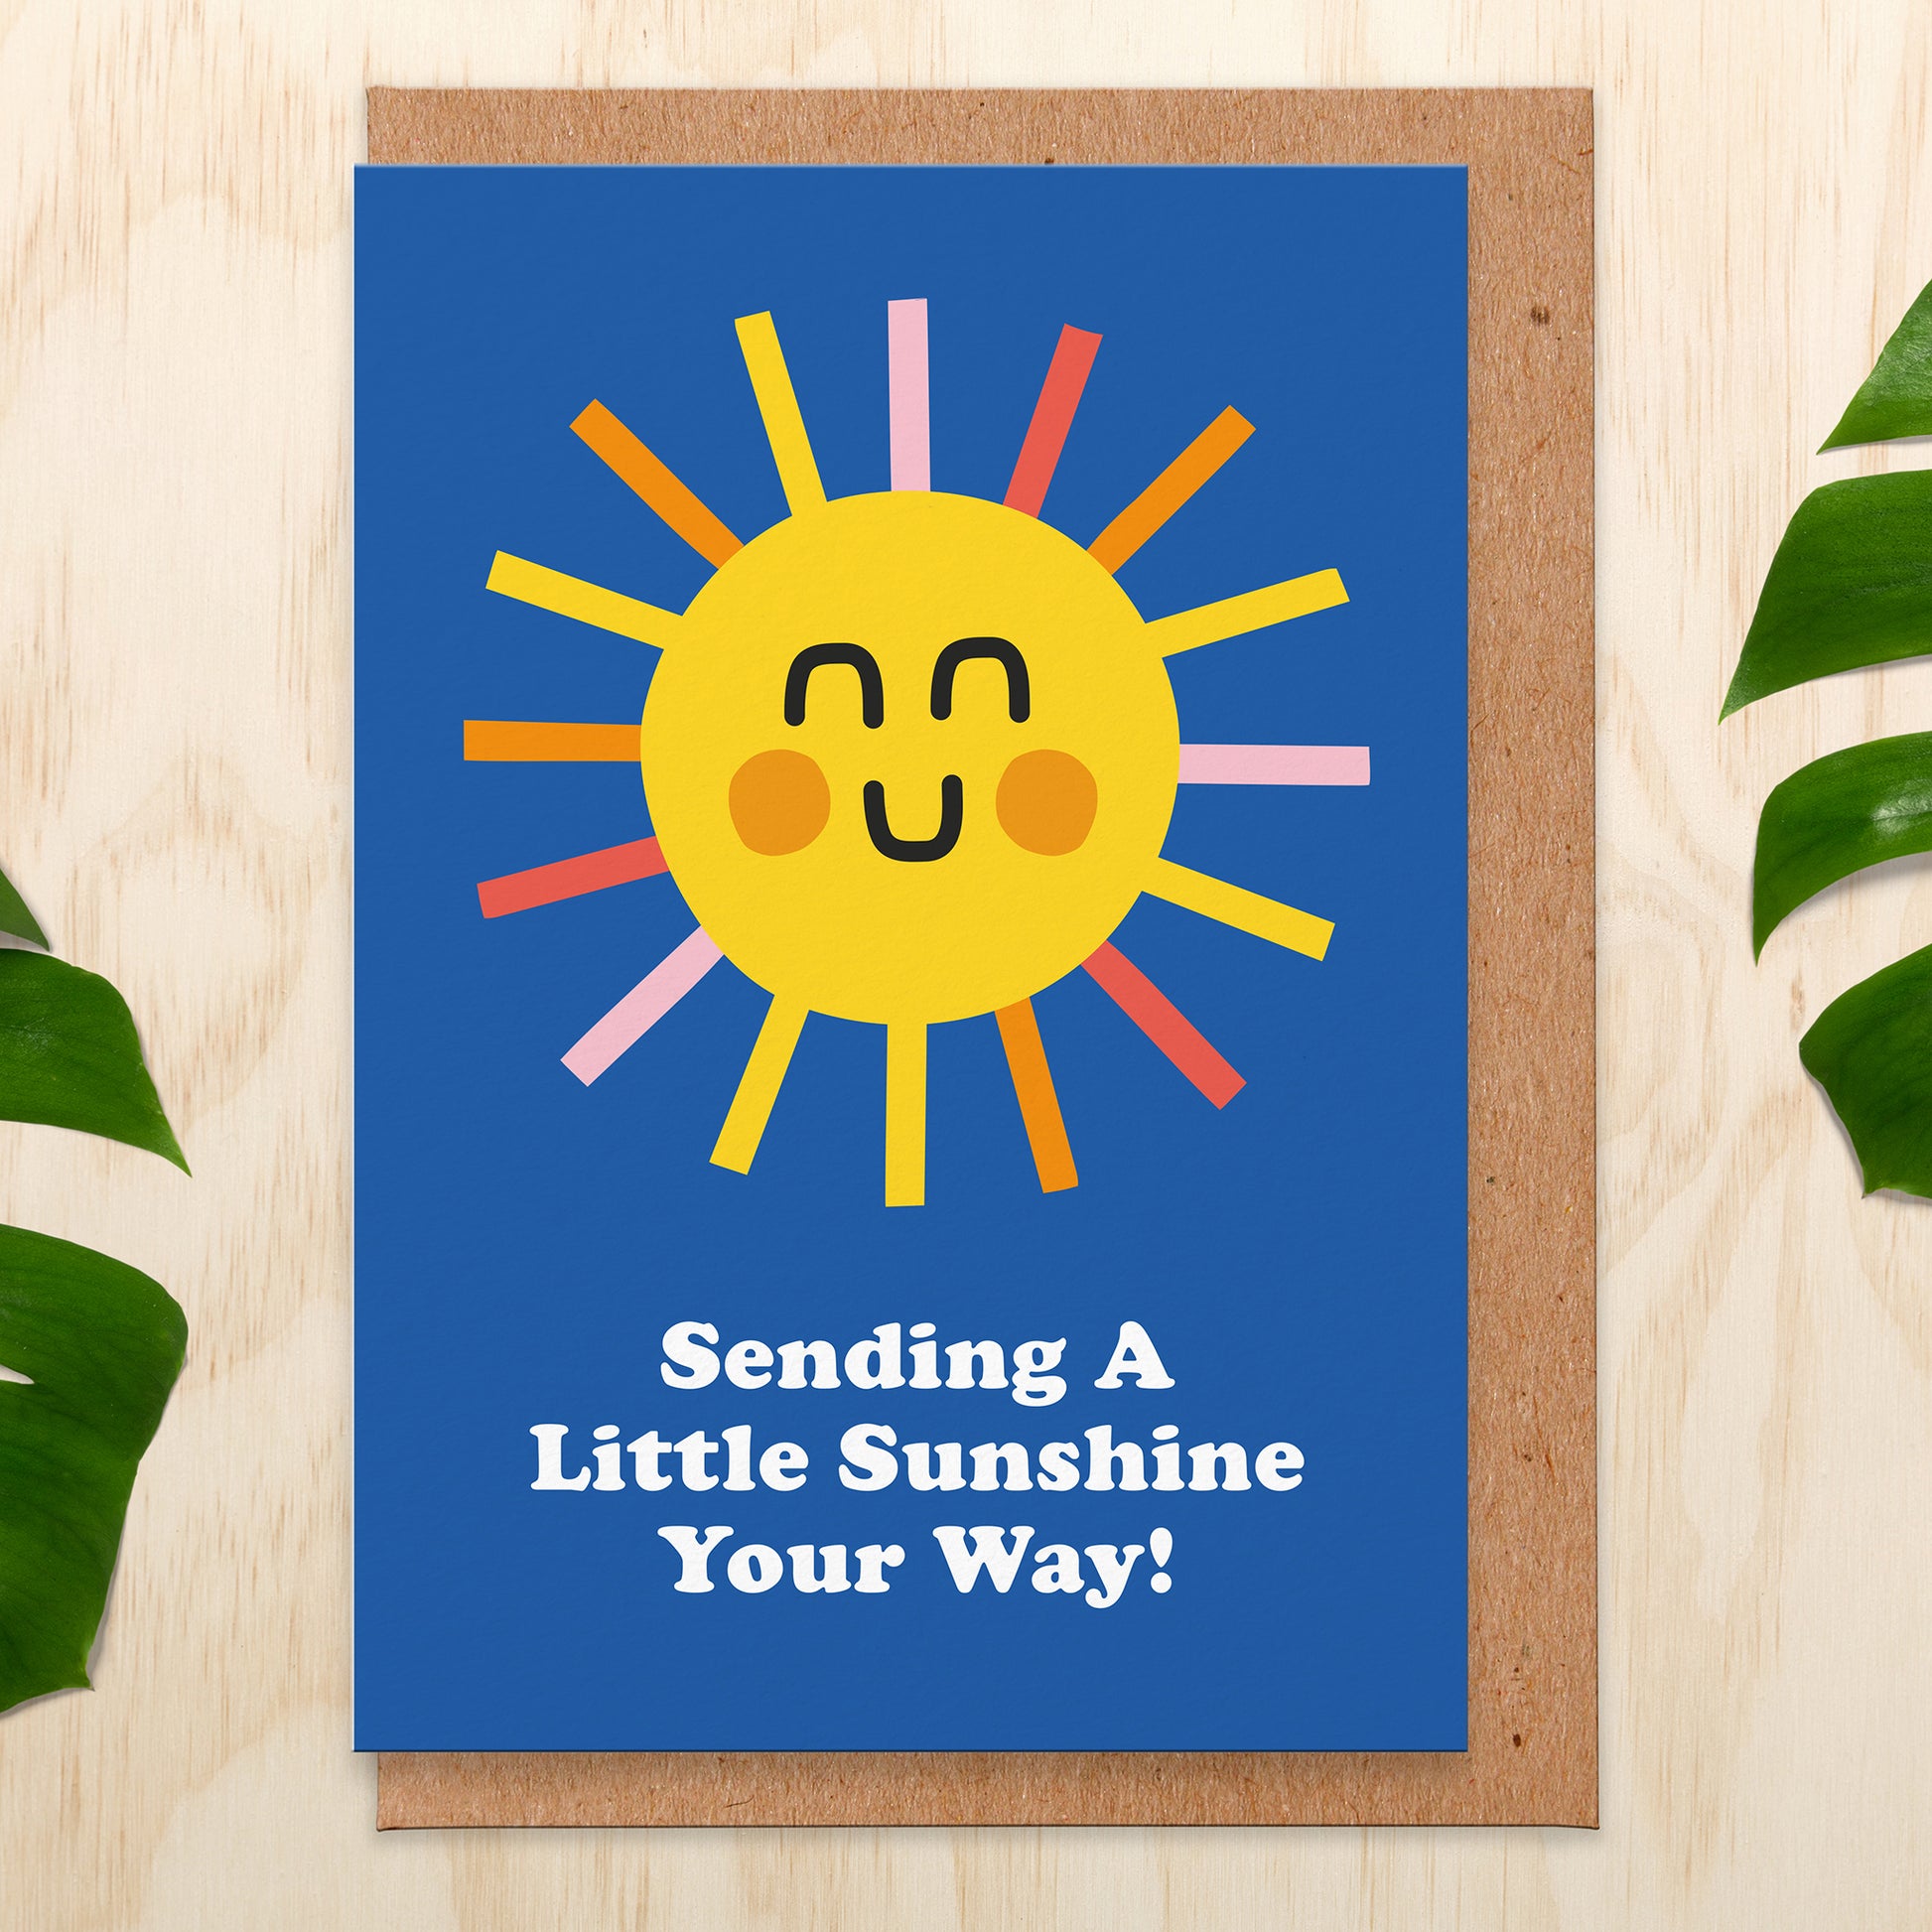 Greetings card with a sun on a blue background that reads Sending A Little Sunshine Your Way!